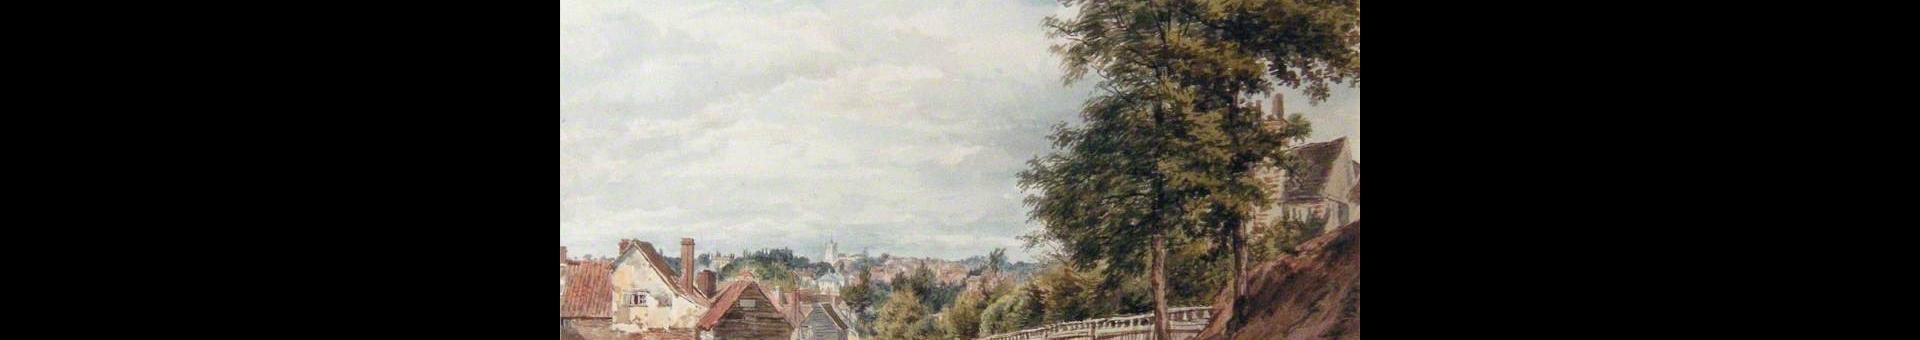 A View Over Bushey from Clay Hill, William Henry Hunt (1790 - 1864)